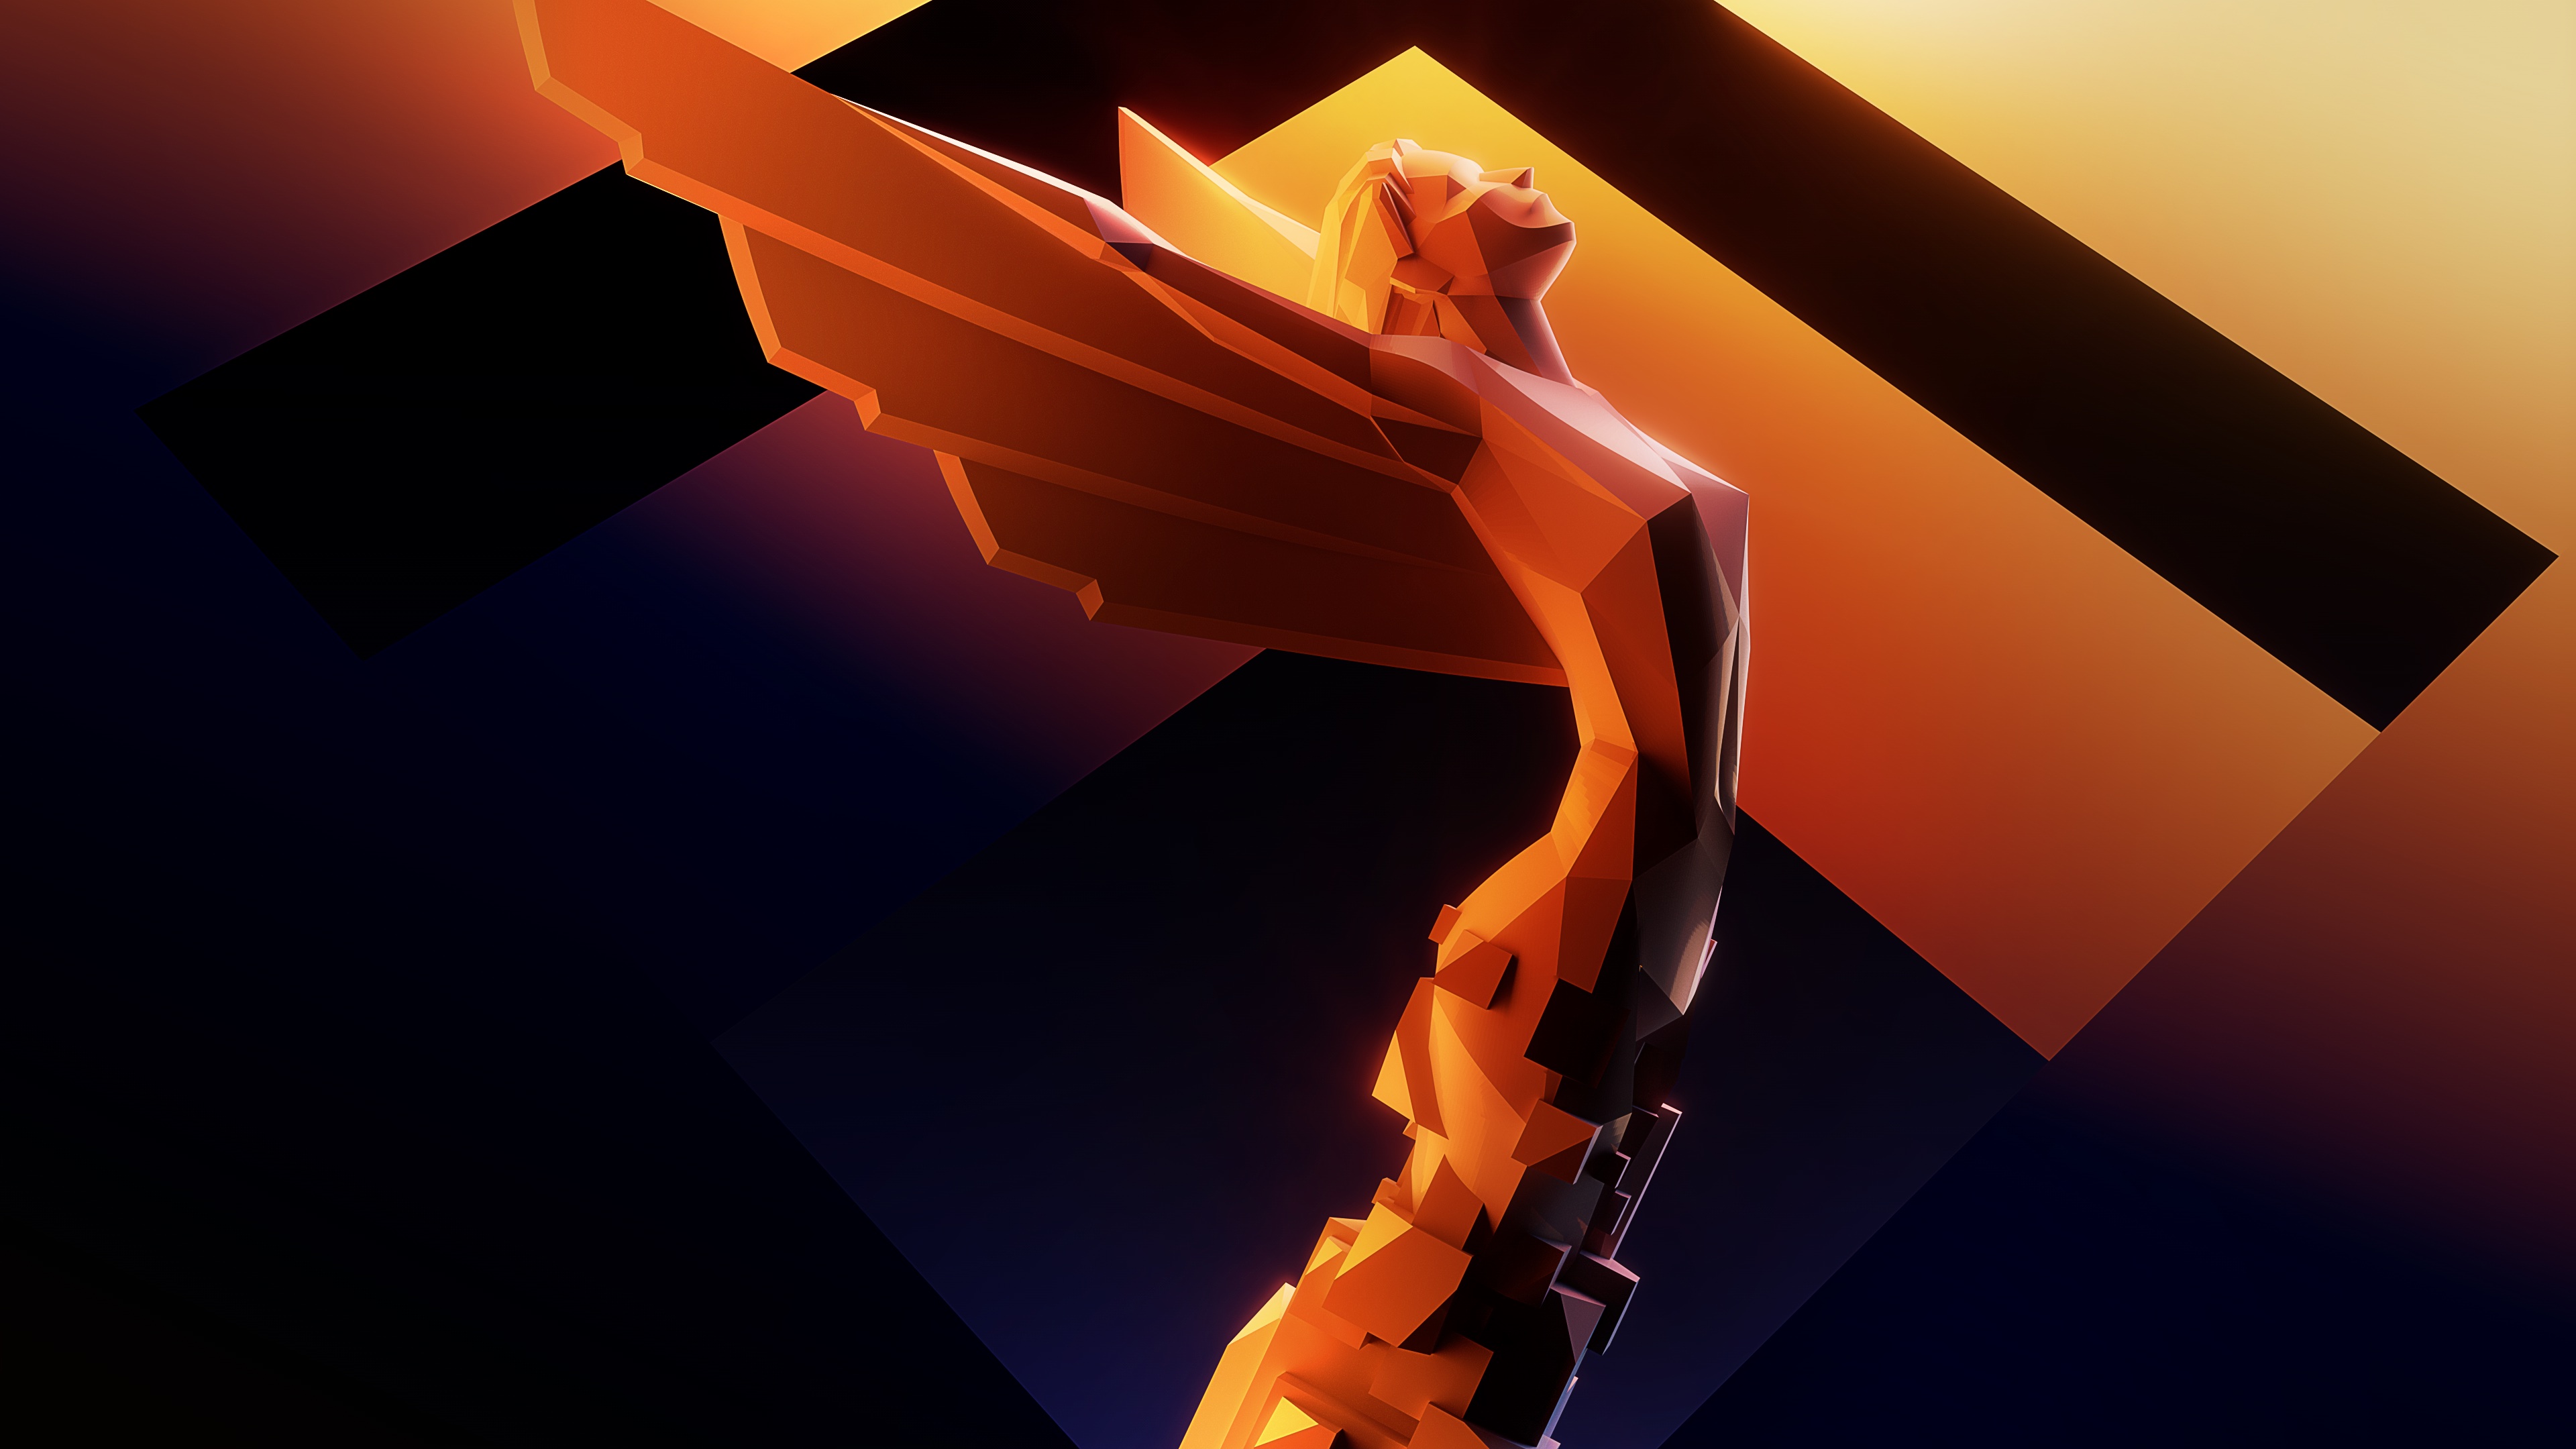 Artwork for The Game Awards, featuring the winged trophy on an abstract background